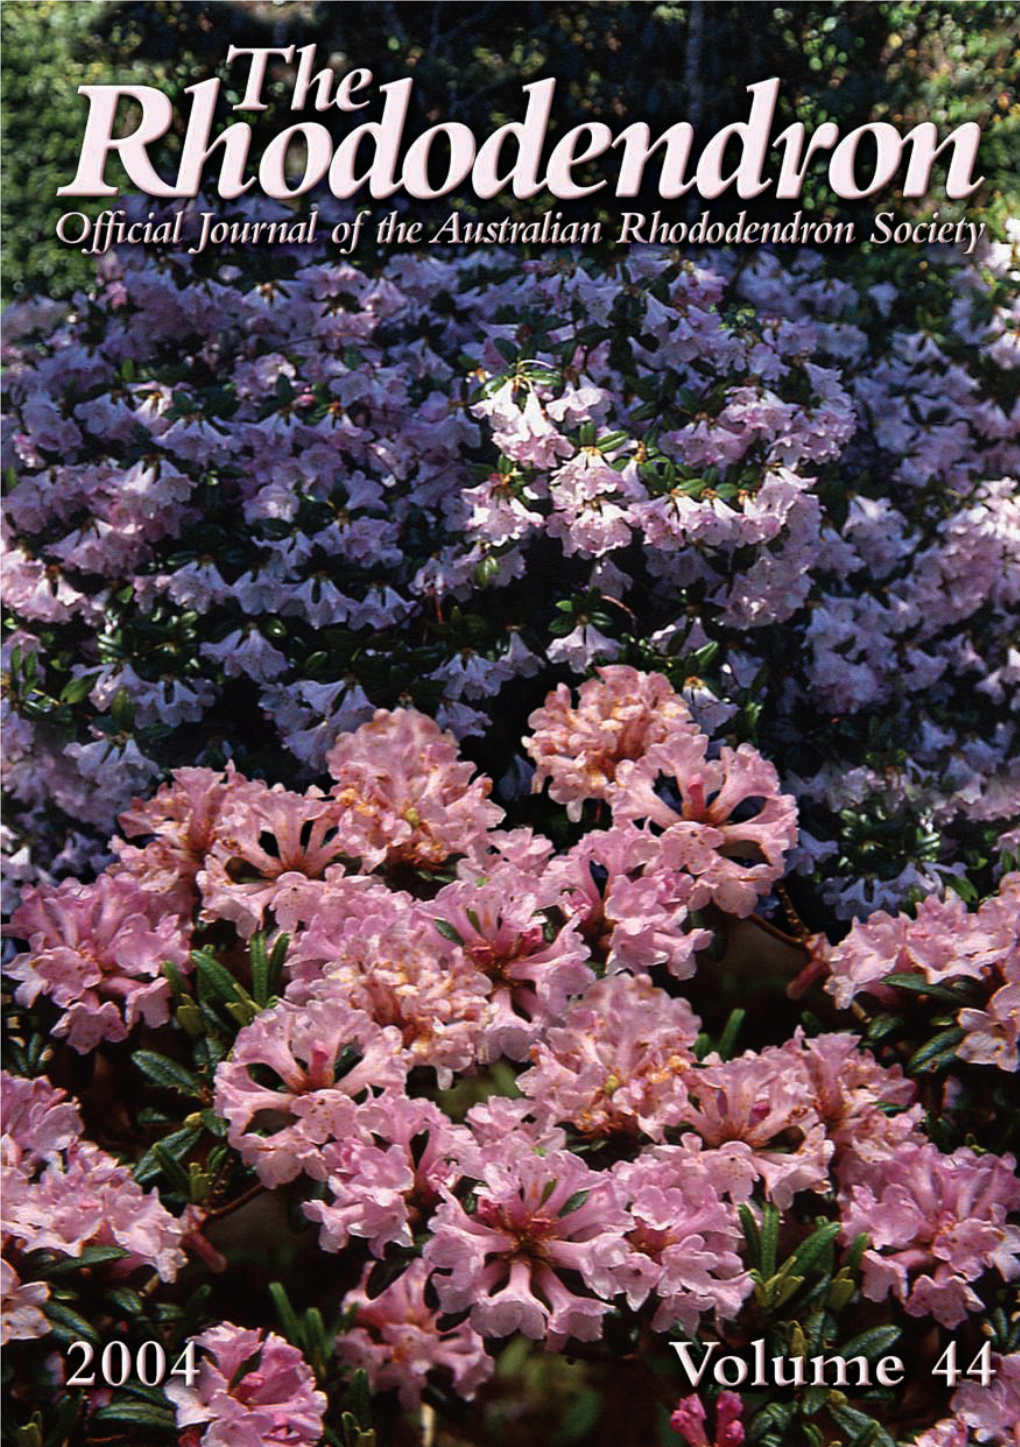 2004 the Rhododendron1.Pdf